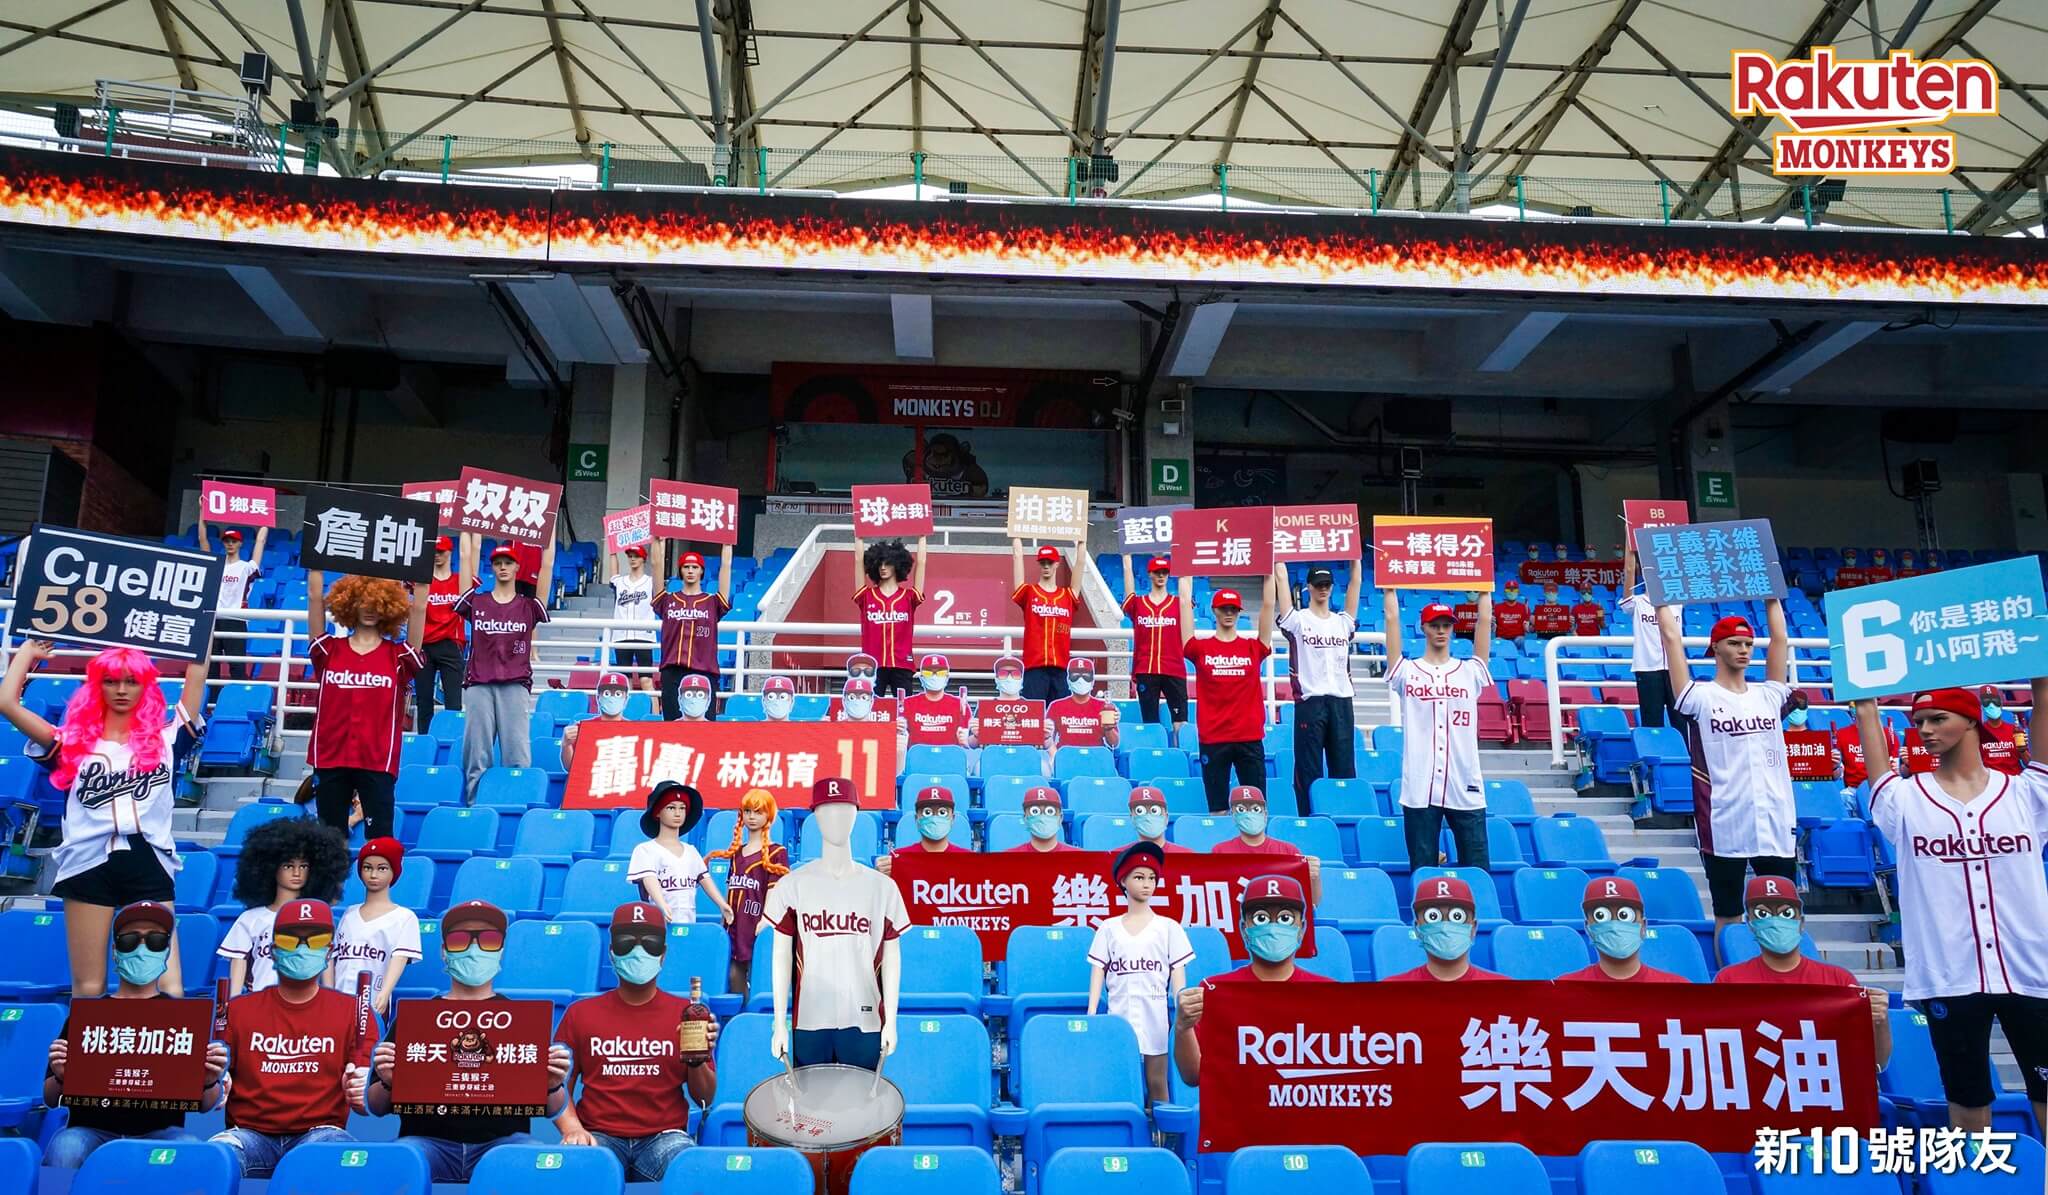 Rakuten Monkeys to Have Robot Mannequins in Stands as Fans